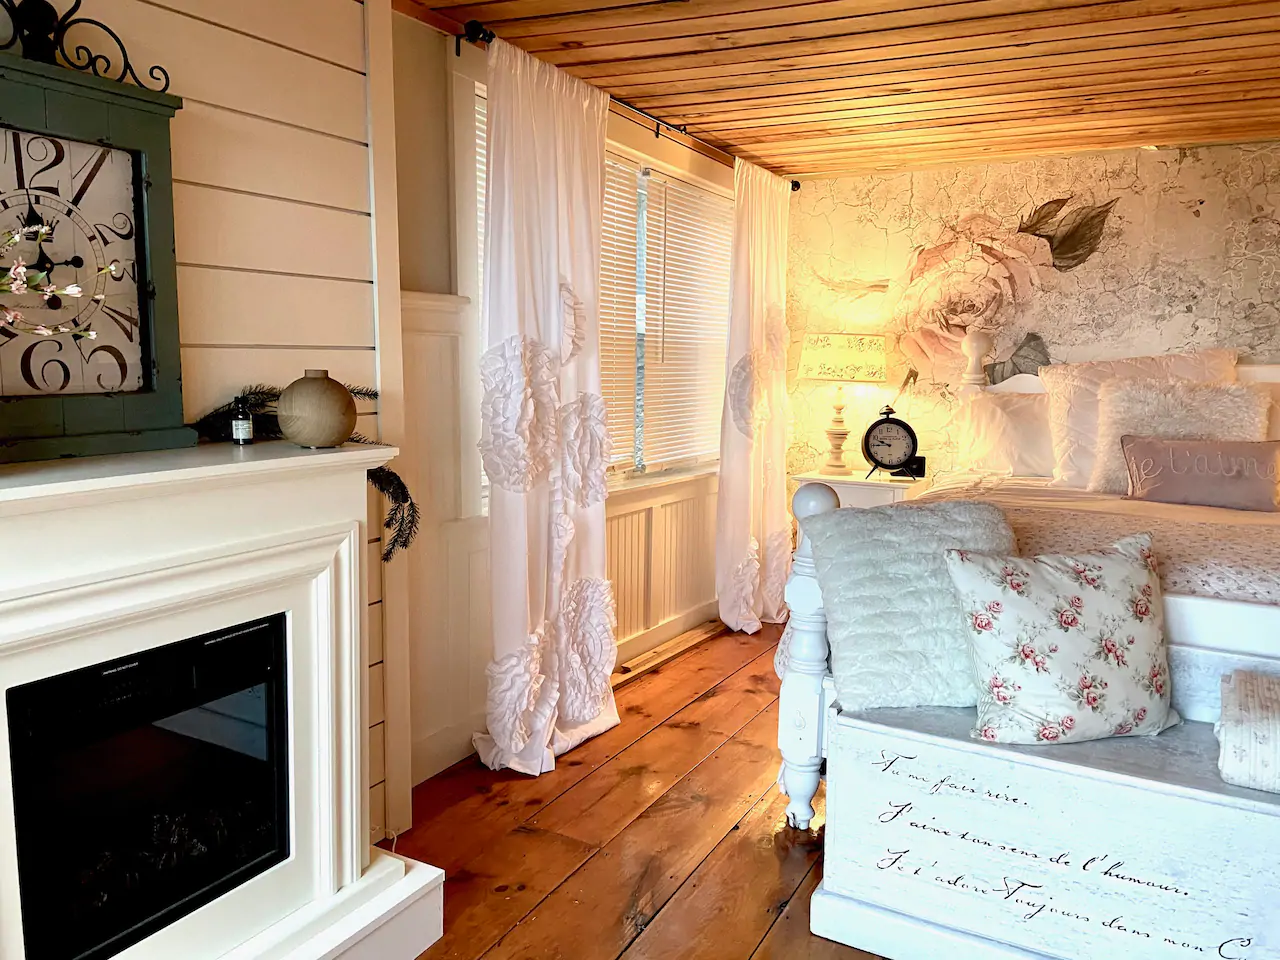 Interior of a bedroom with a cottage core theme. To the left is a white fireplace and a window with its shades closed. To the right is a plush bed with white bedding.